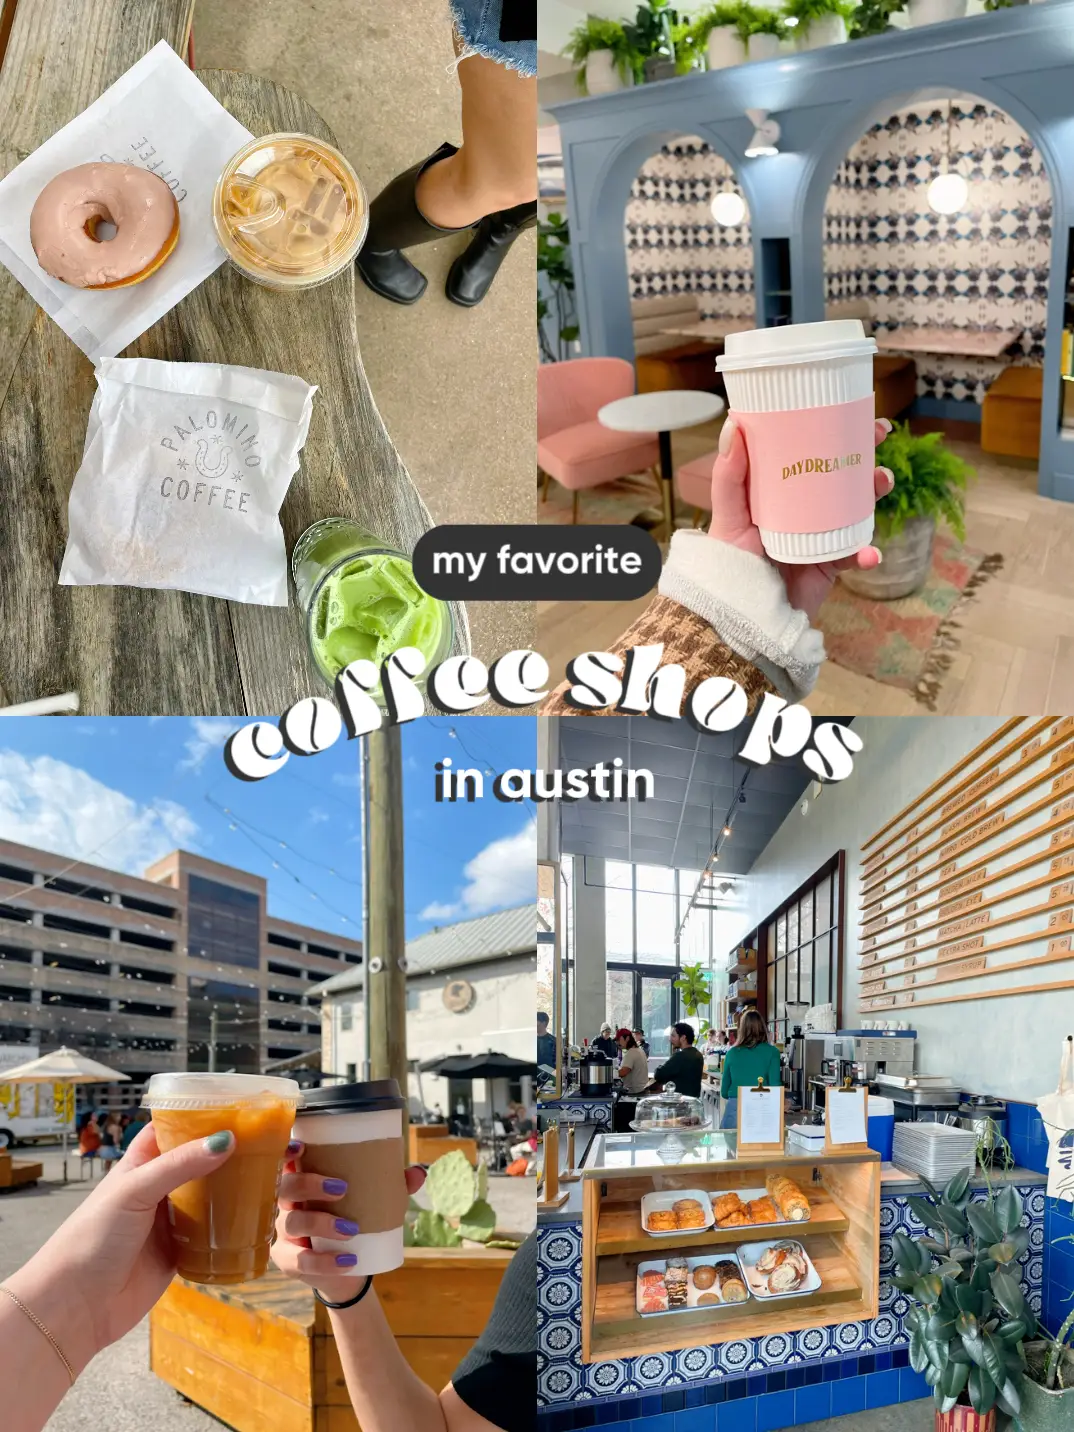  A collage of images and text that says "My favorite coffee shops in Austin".